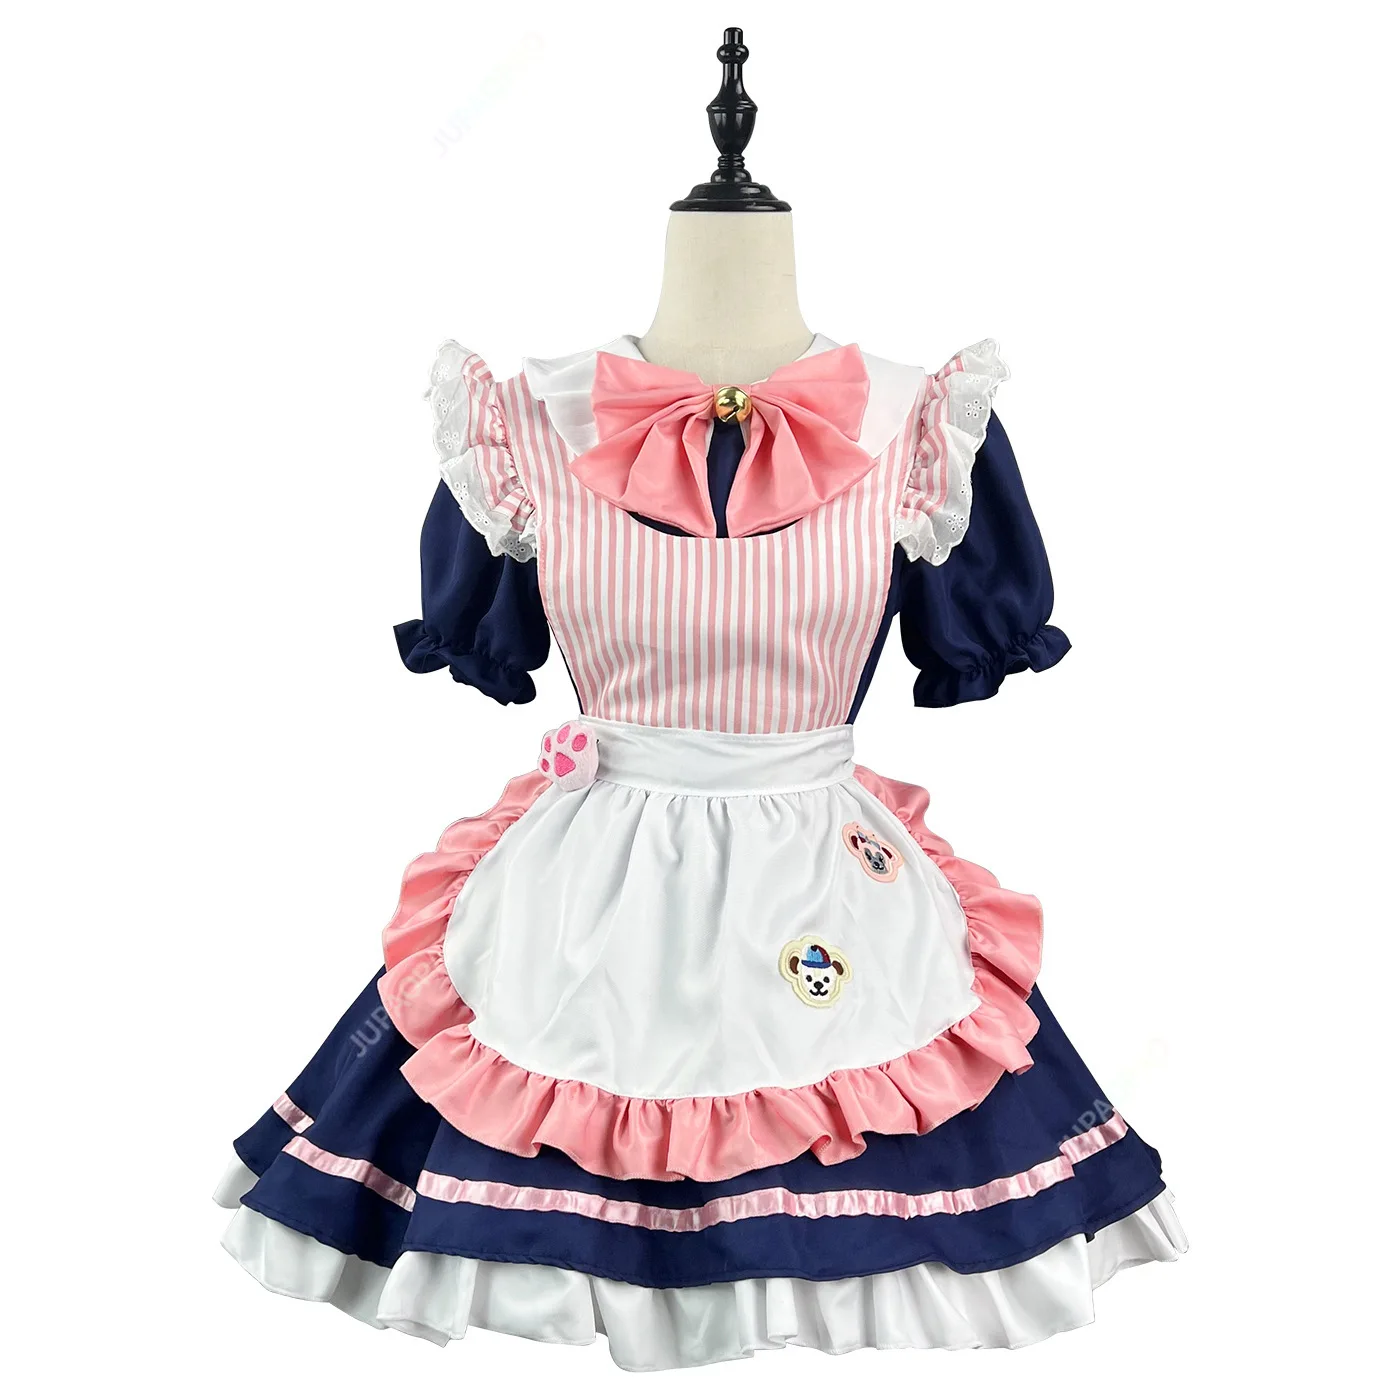 

New Models Cute Lolita Cat Maid Dress Costumes Cosplay Cat Girl Maid Dress Suit for Waitress Maid Party Stage Costumes S -5XL